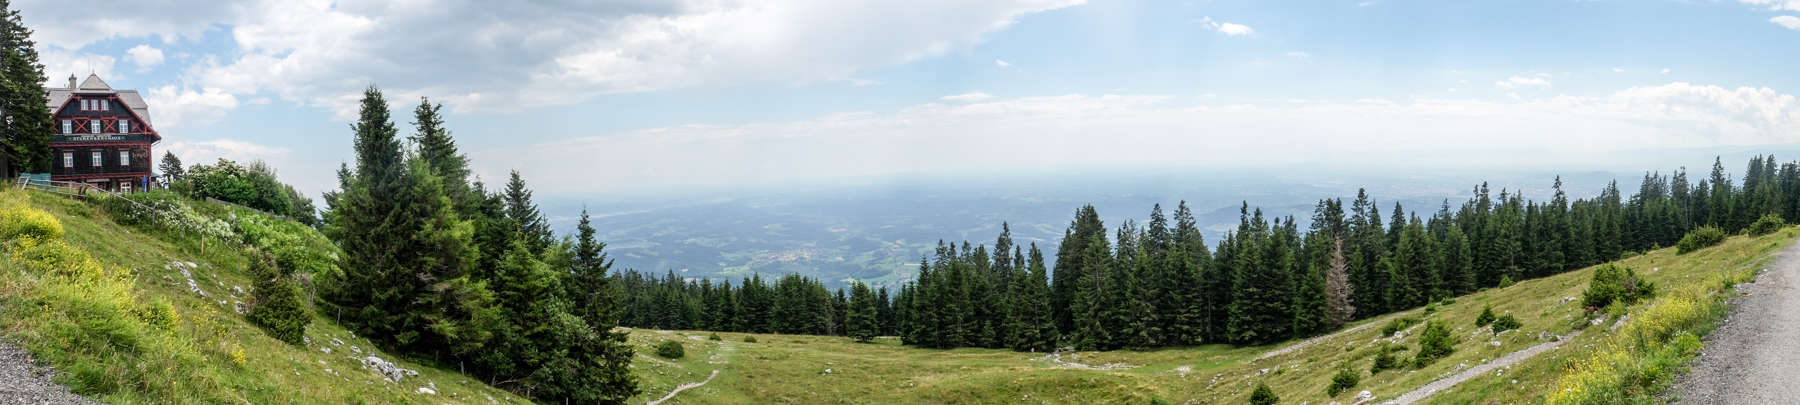 A panoramic view from the top of the Schöckl Mountain near Graz, Austria showing the mountain hut, a wide view of neighbouring countries and part of the hiking pathway